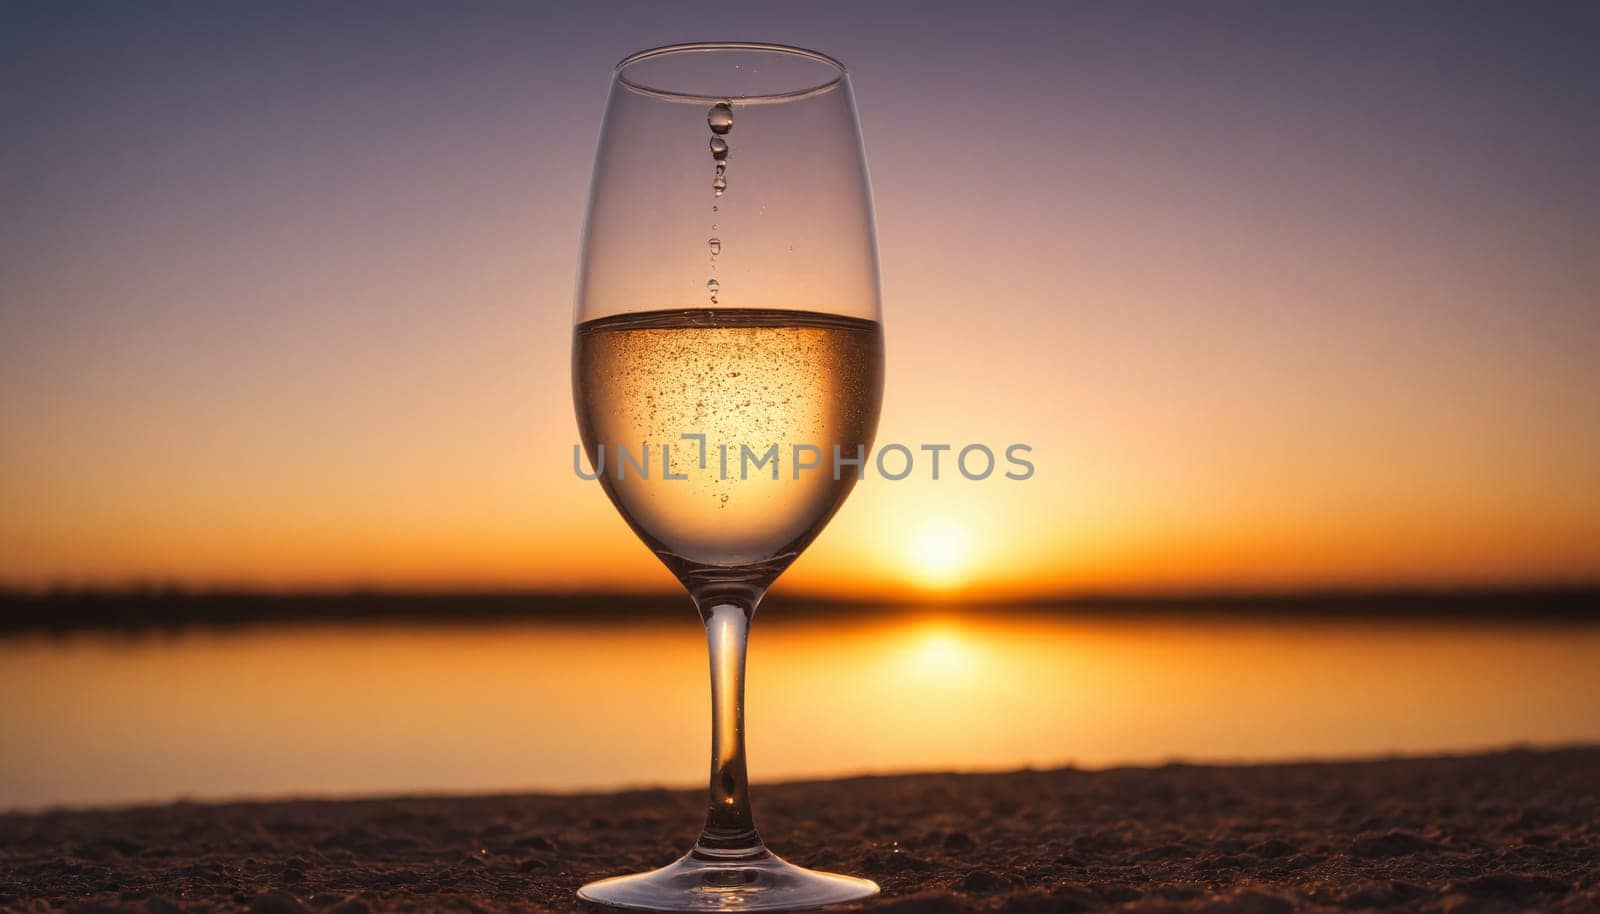 A single glass of water stands on the edge of a lake, its contents reflecting the warm colors of a setting sun. The stillness of the moment is emphasized by the calm water and the soft light, creating a peaceful and contemplative scene.